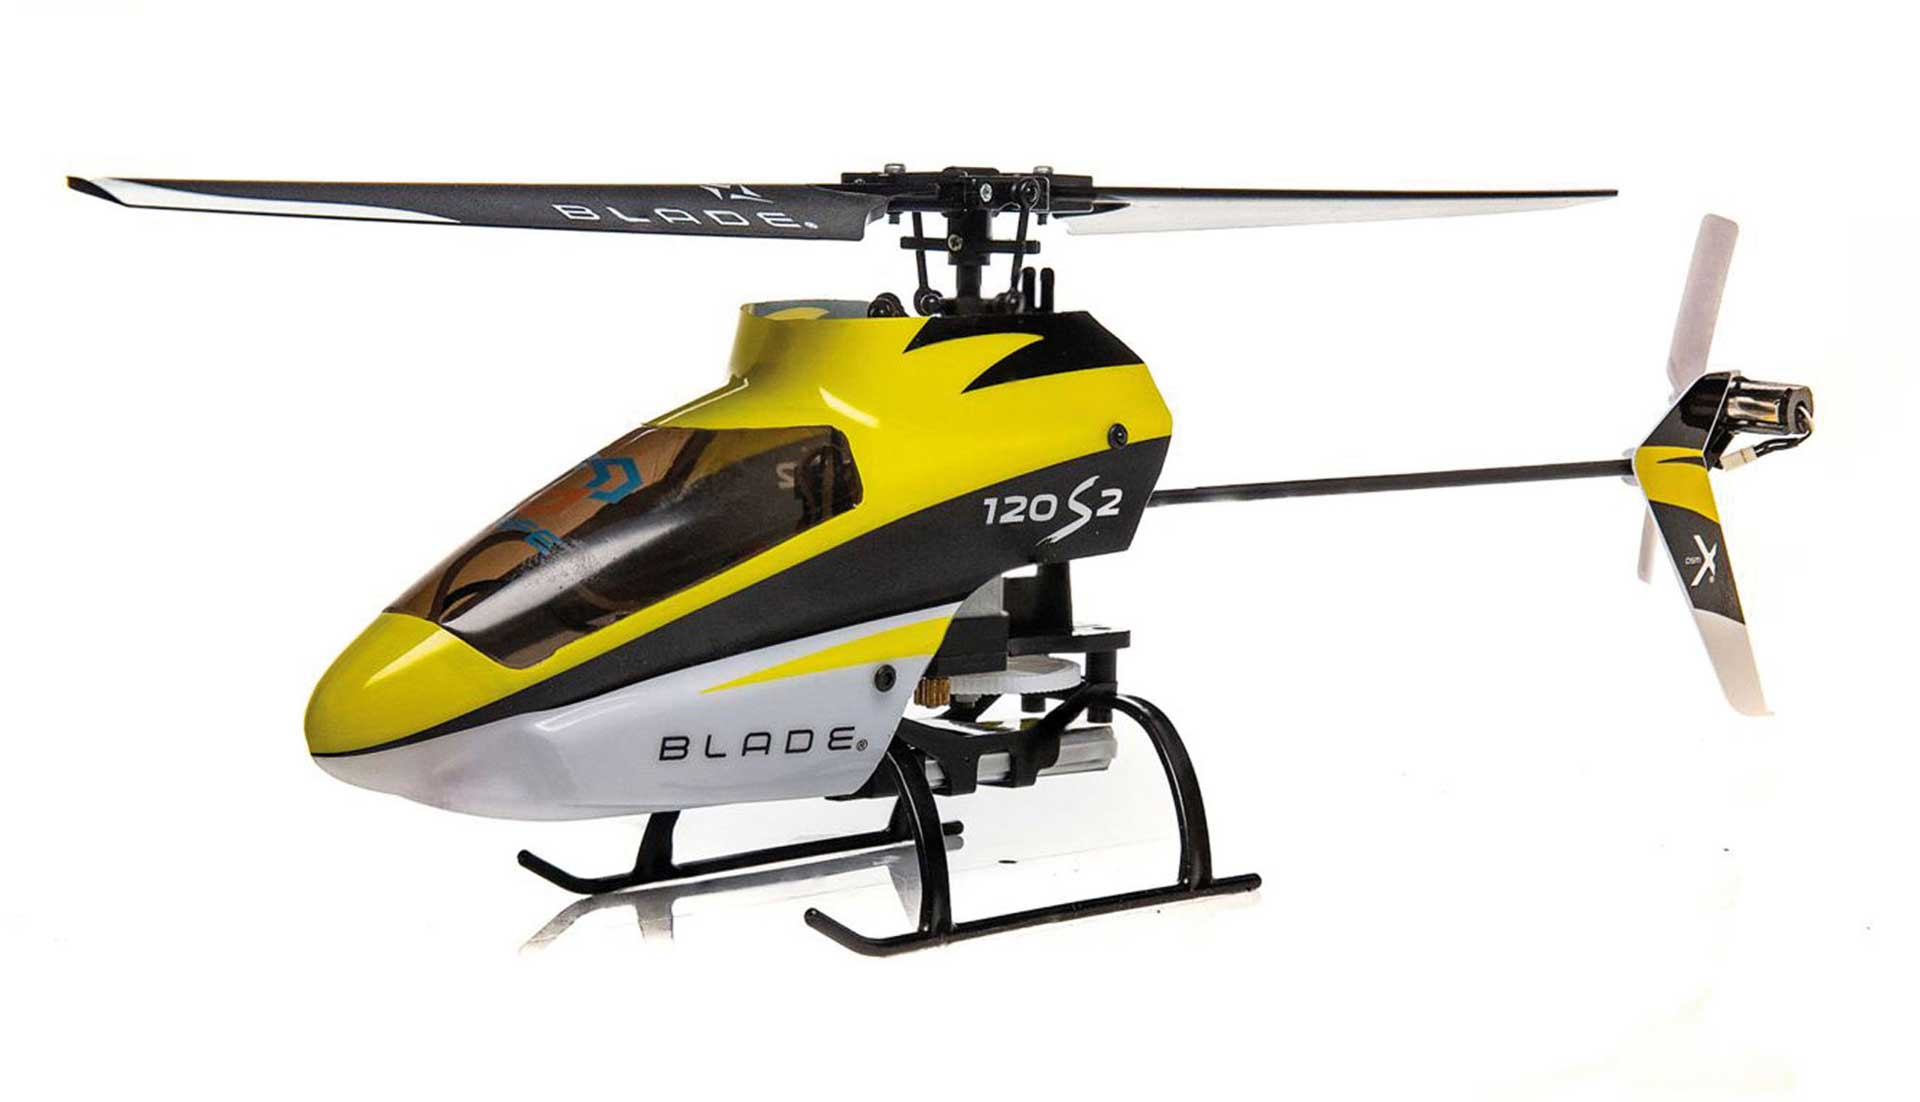 BLADE 120 S2 RTF INCL. SAFE RC Helicopter